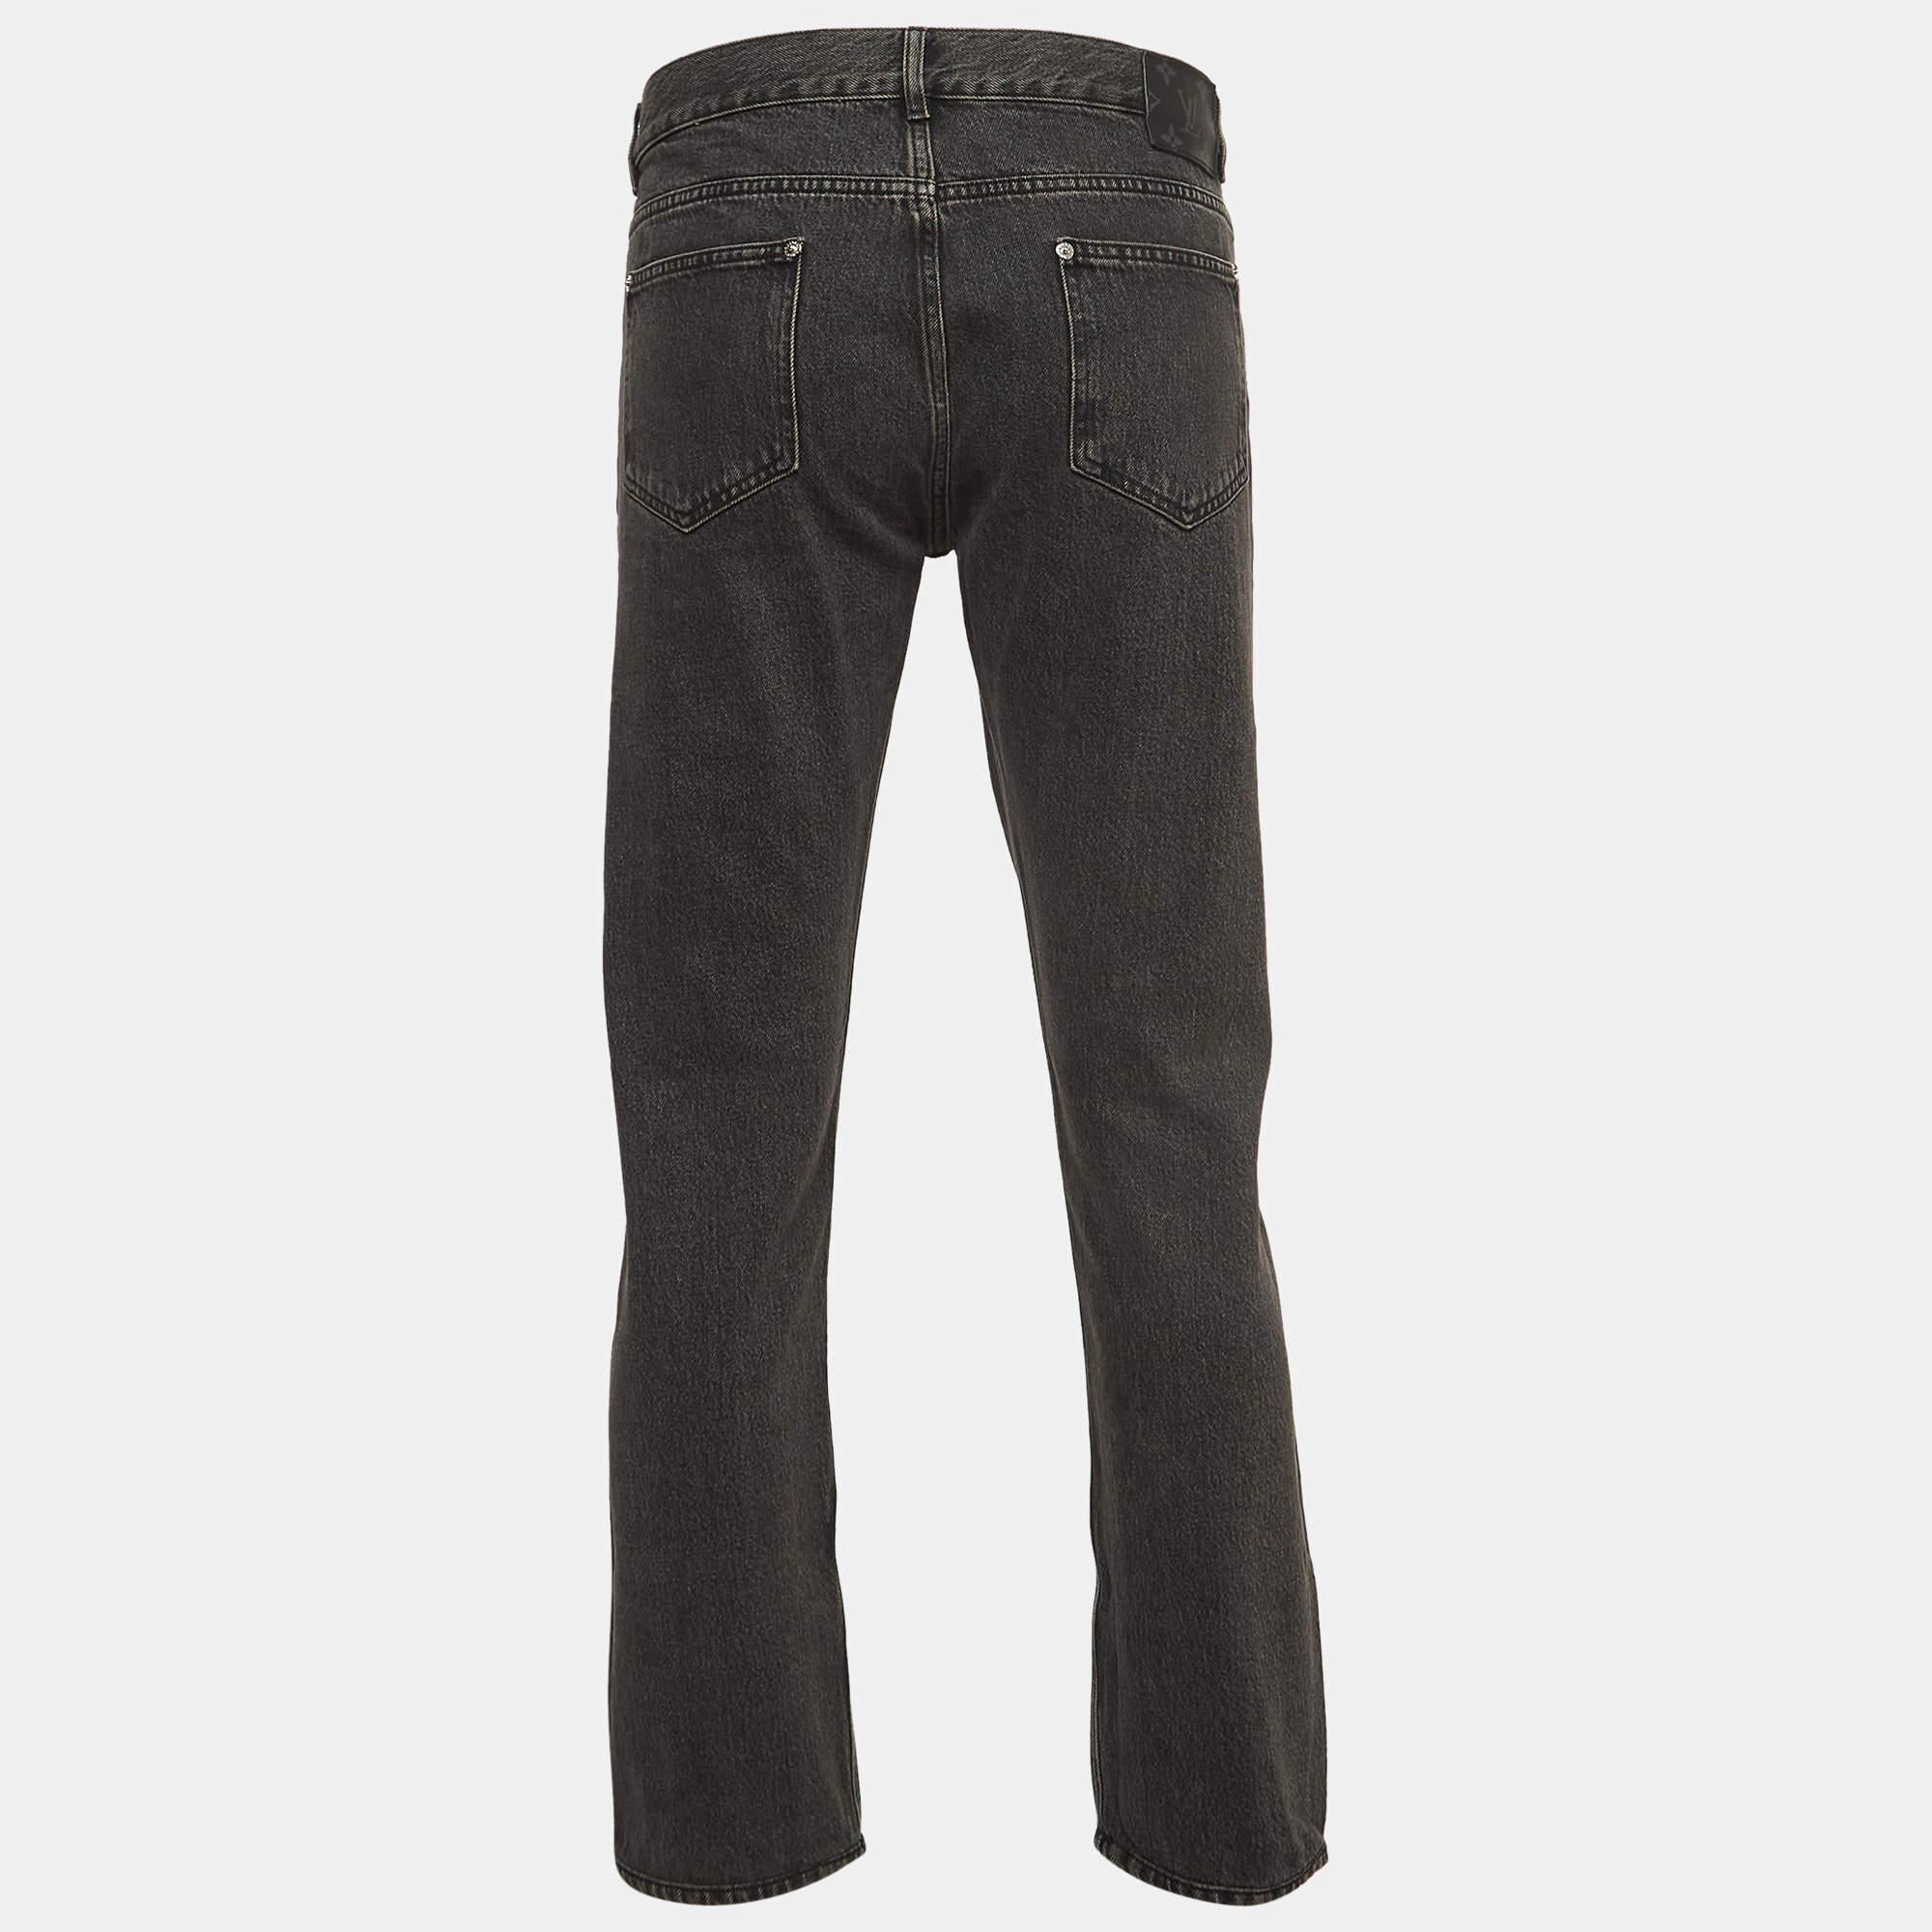 A good pair of jeans always makes the closet complete. This pair of jeans is tailored with such skill and style that it will be your favorite in no time. It will give you a comfortable, stylish fit.

